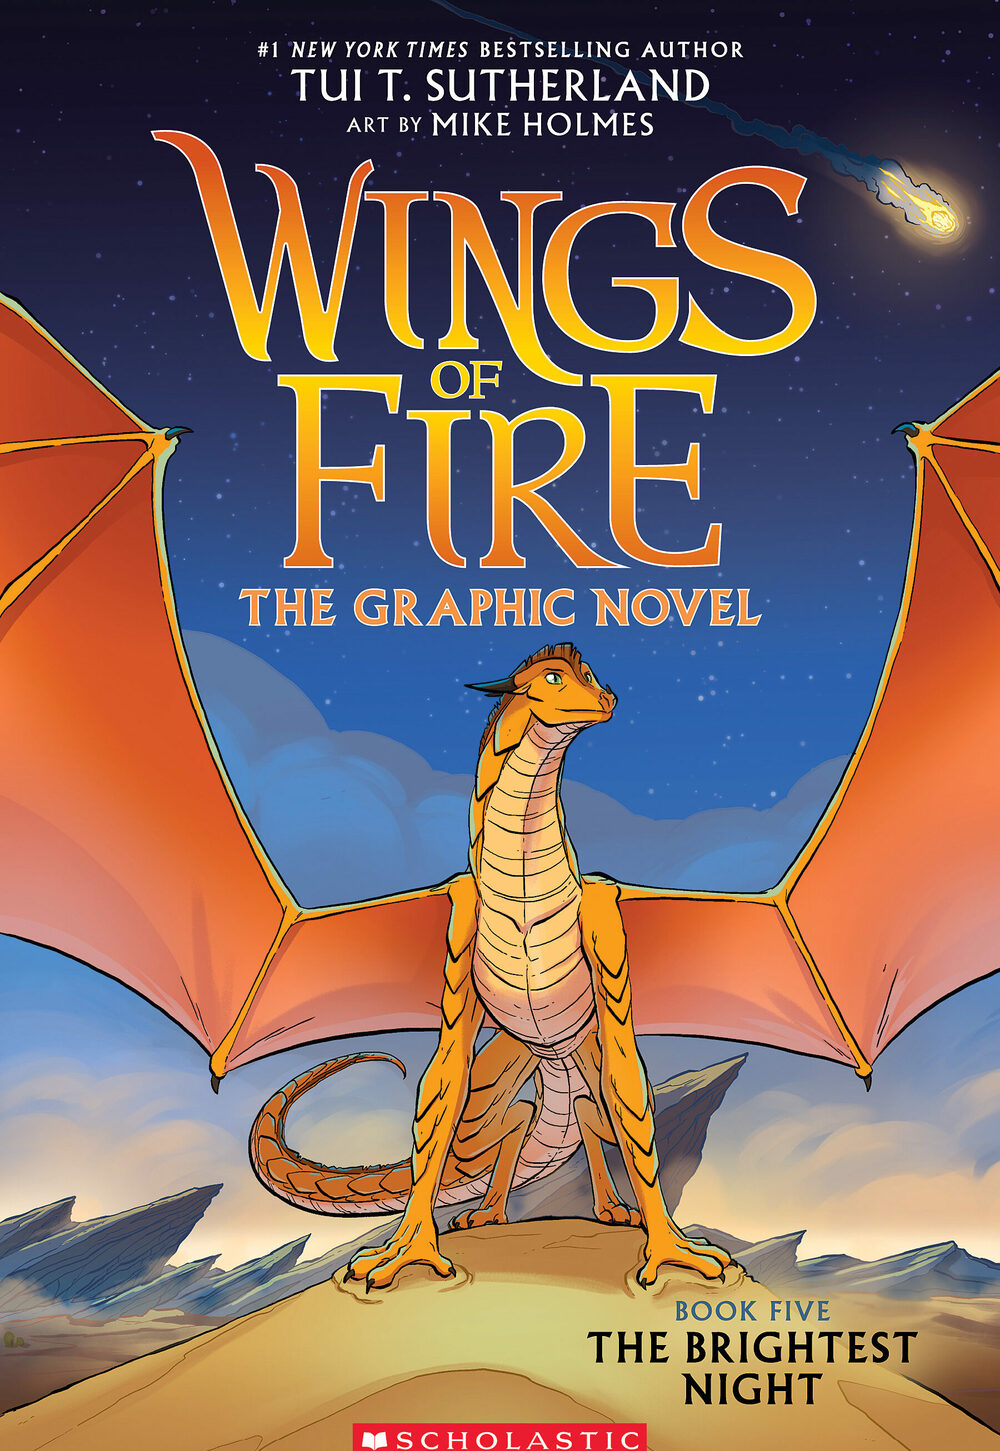 book review about wings of fire